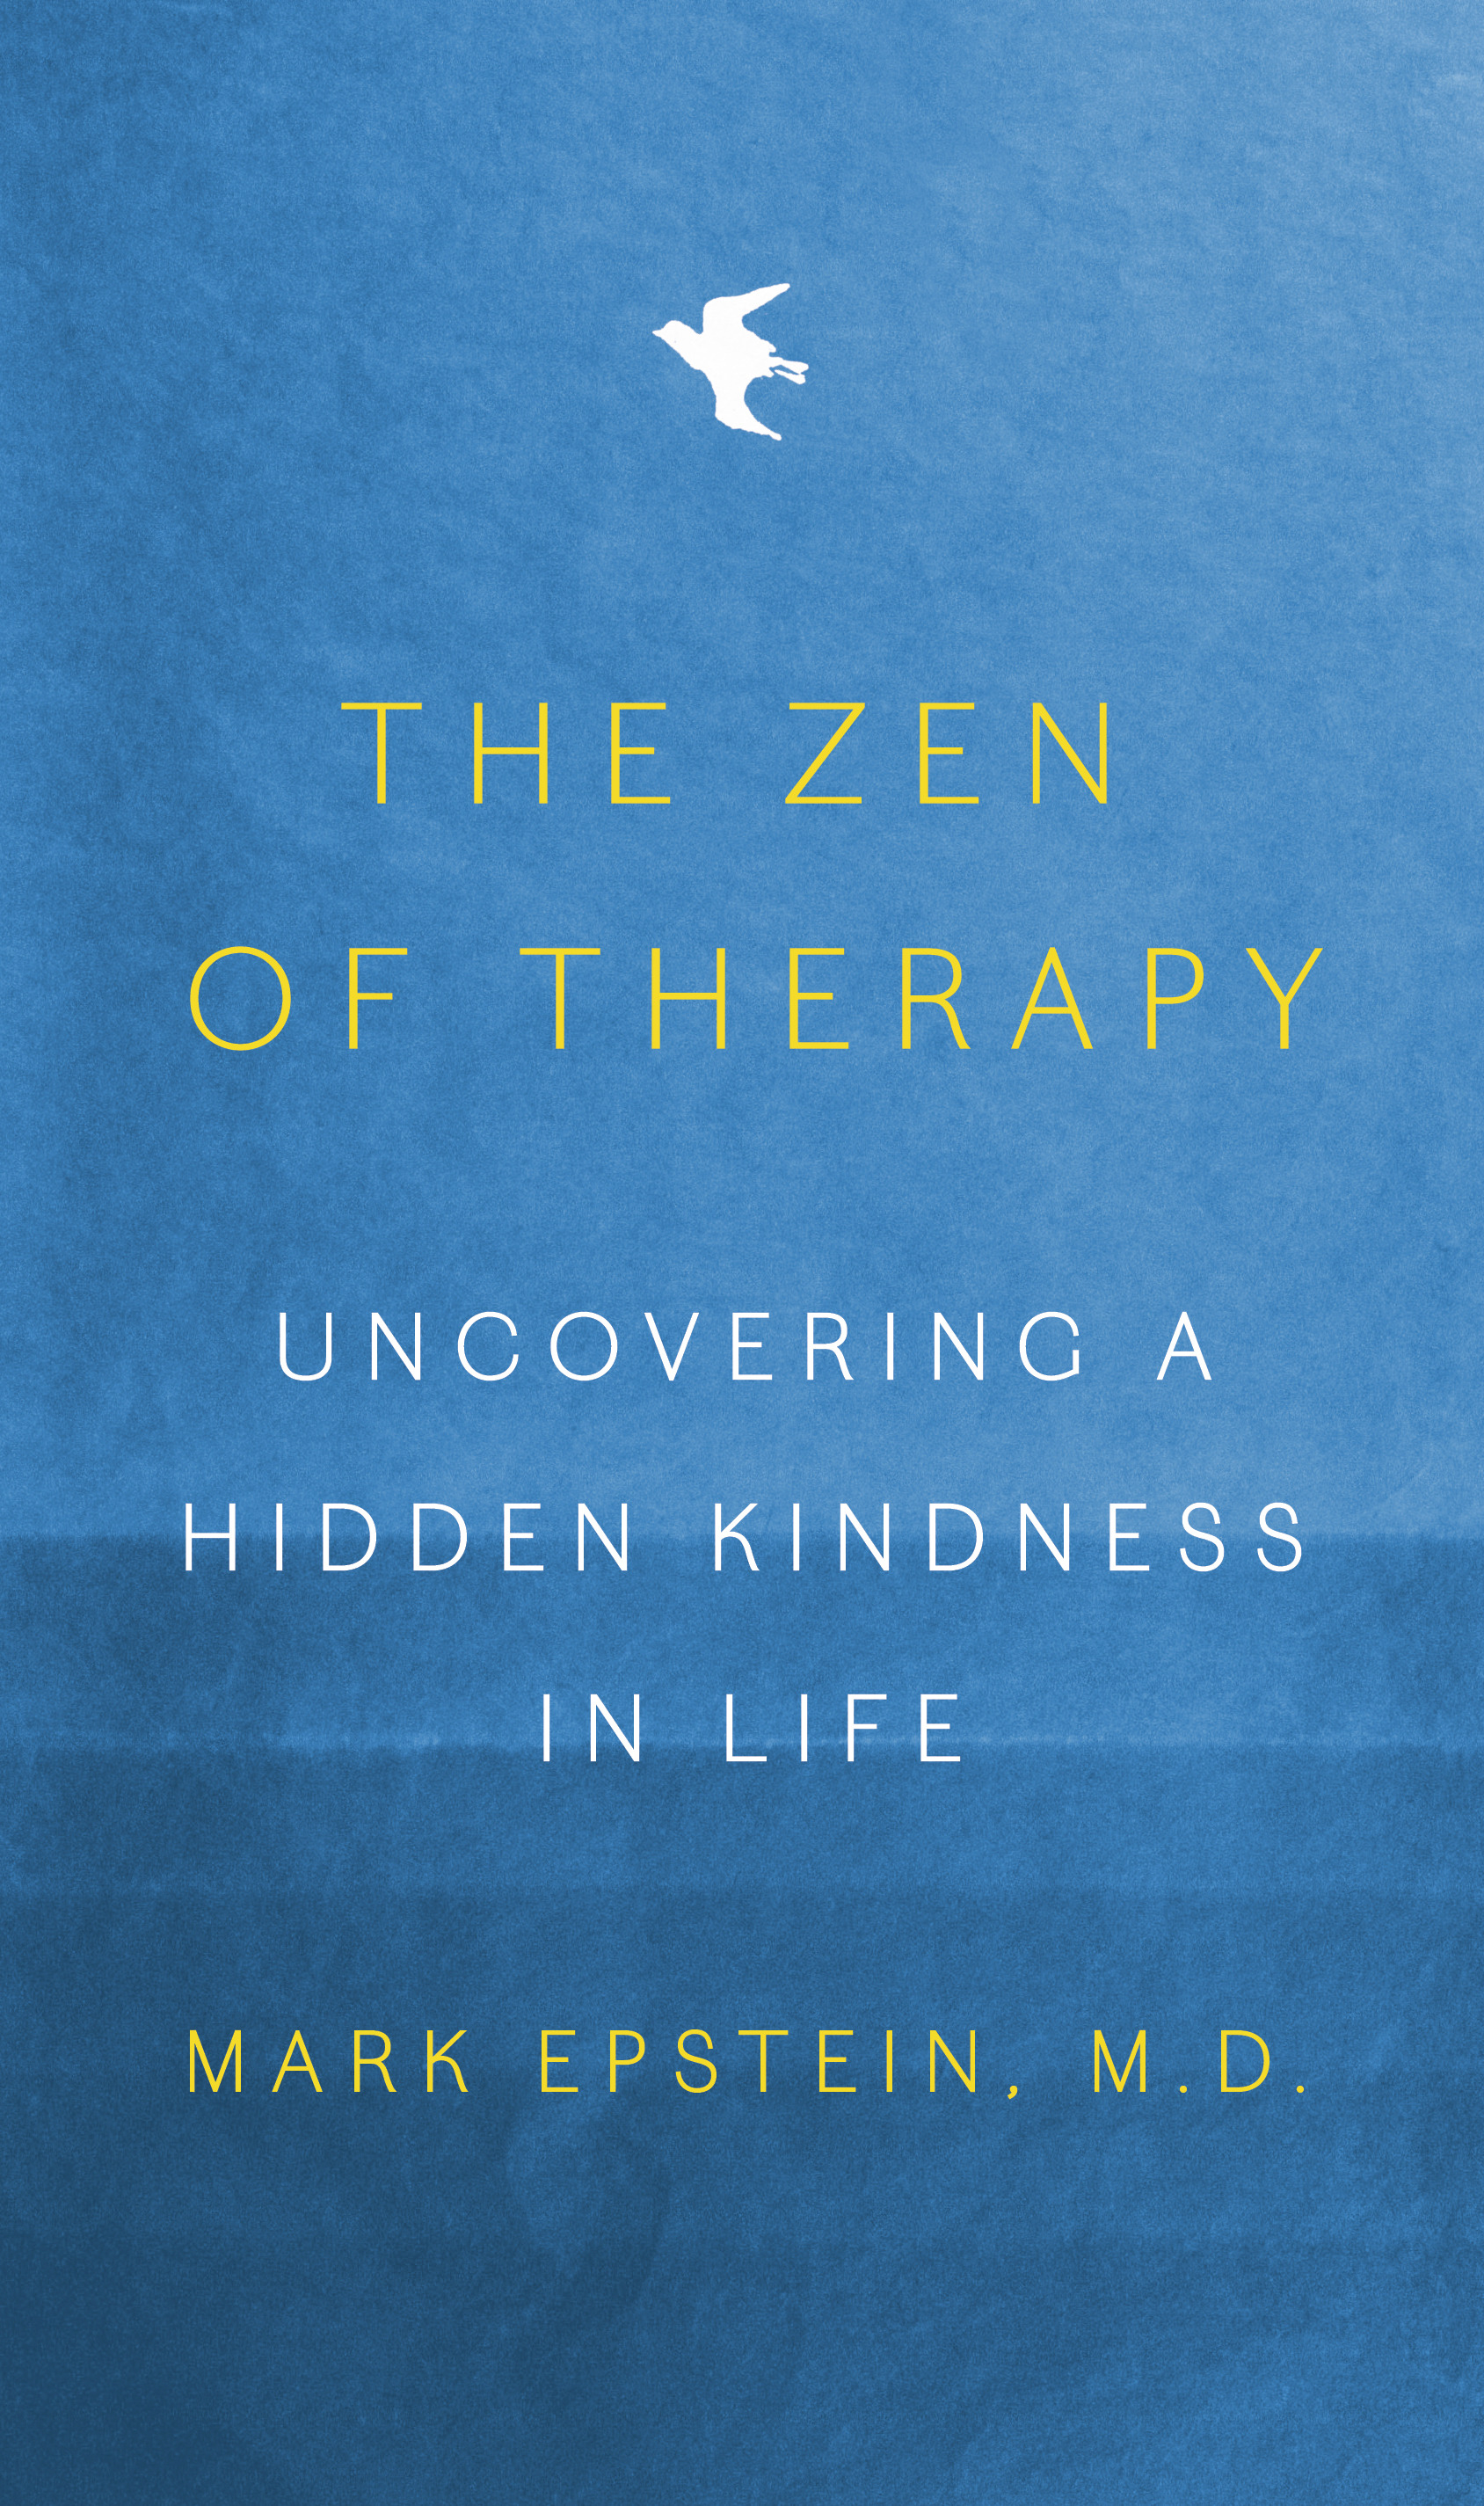 The Zen of Therapy : Uncovering a Hidden Kindness in Life | Psychology & Self-Improvement